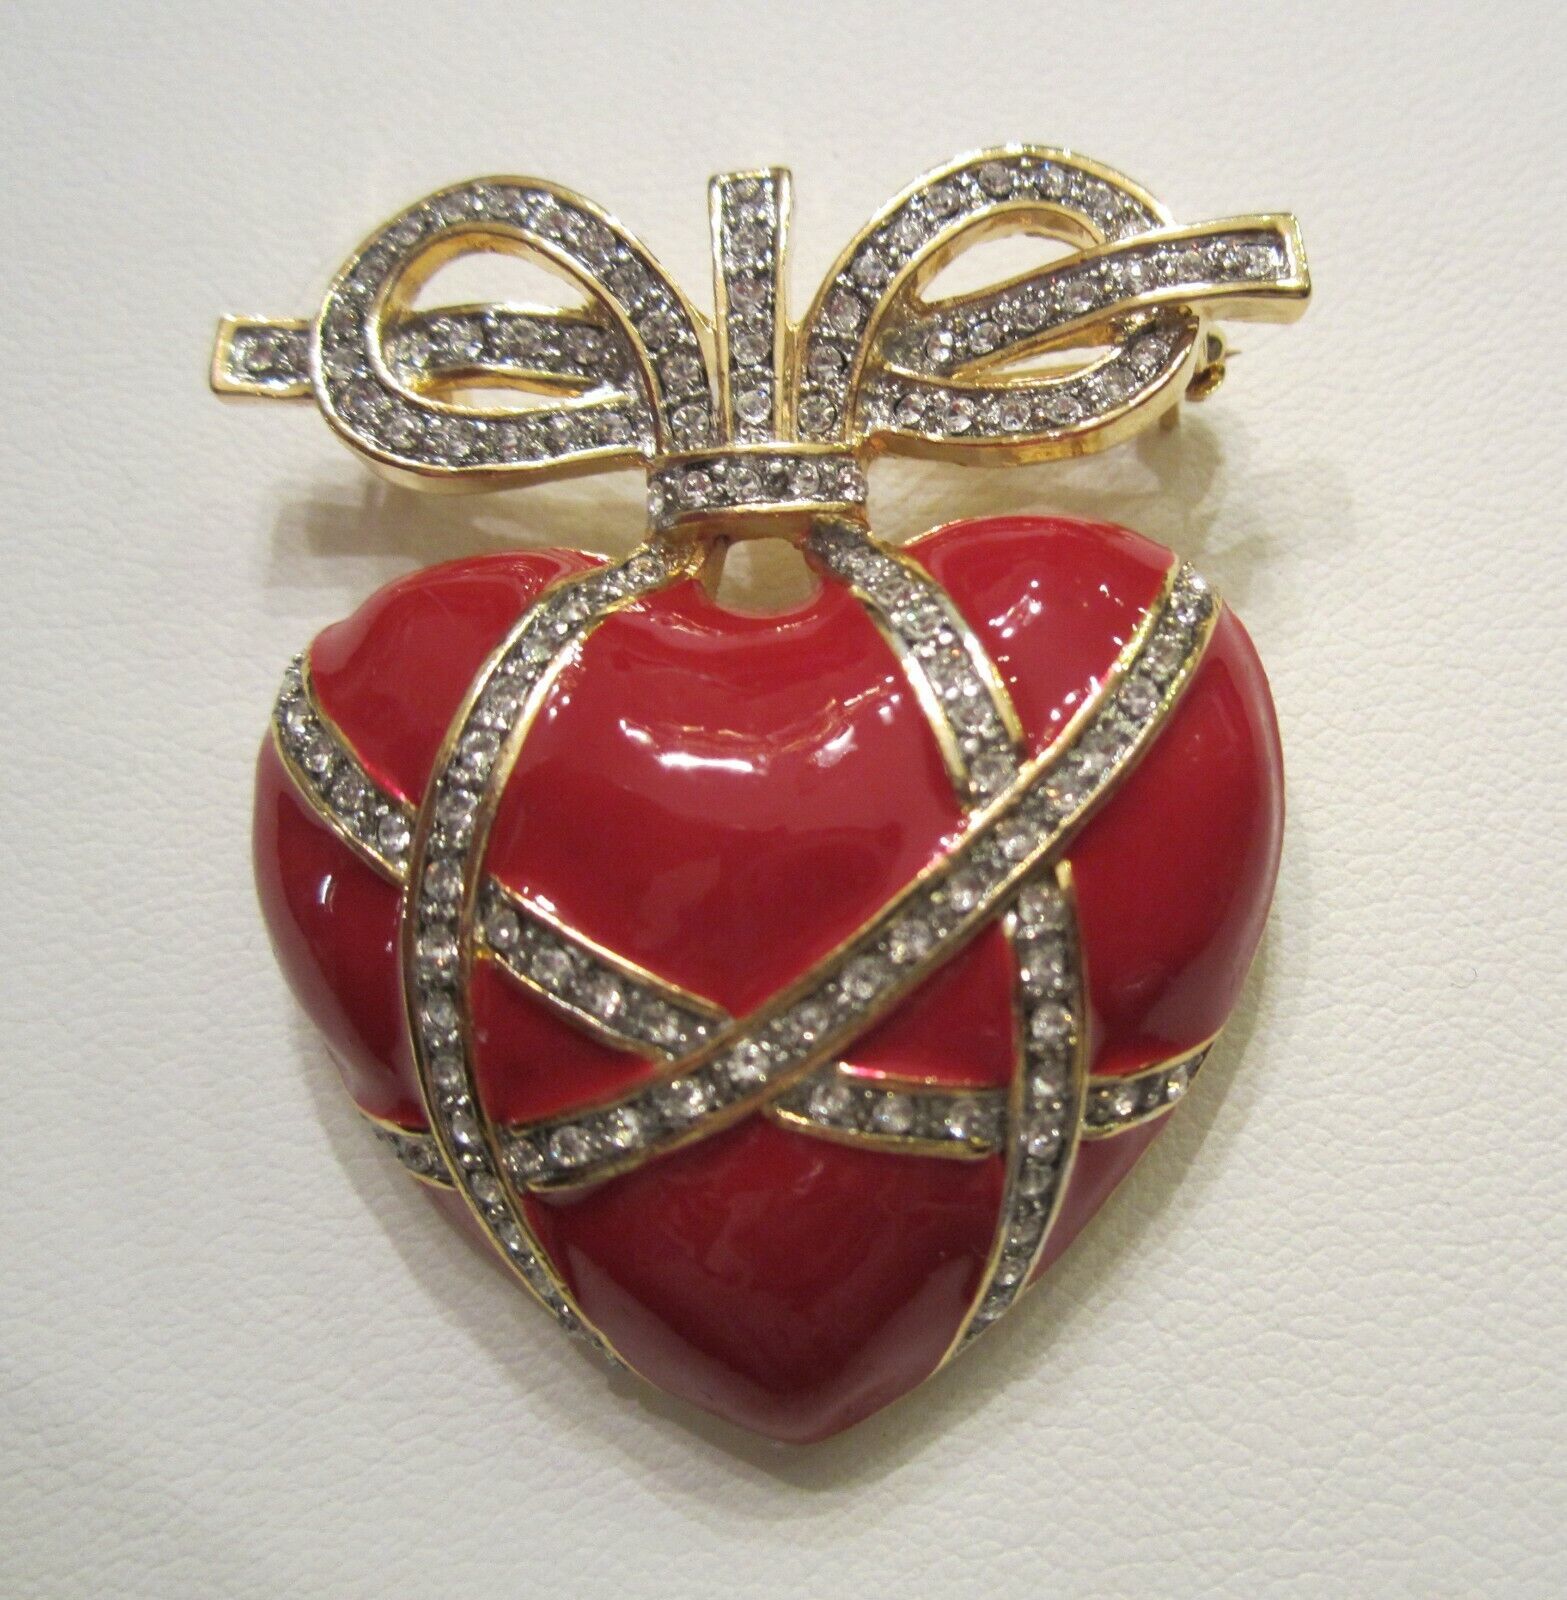 Primary image for Heart Brooch Pin Red Enamel Crystal Rhinestones Bow Royal Look Valentine's Day